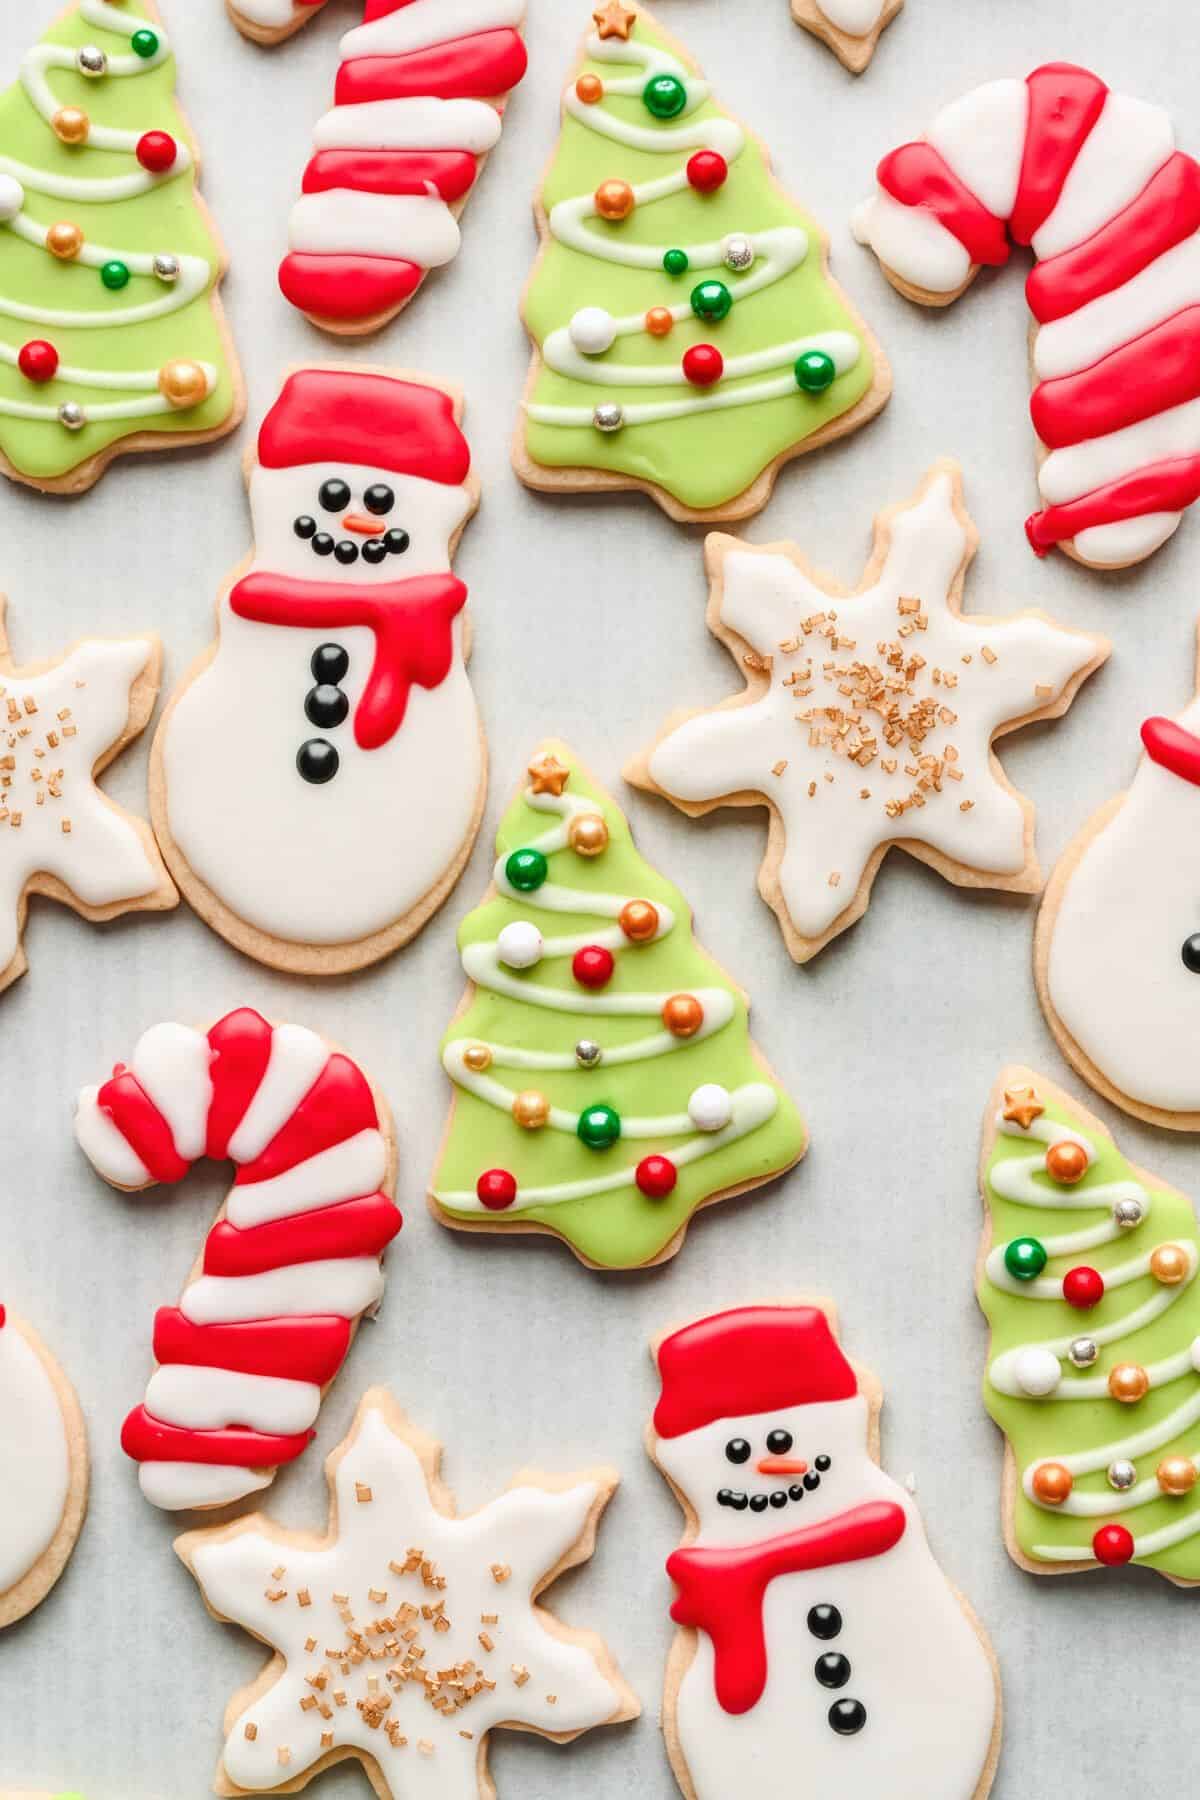 Decorated cut out Christmas Sugar Cookies.